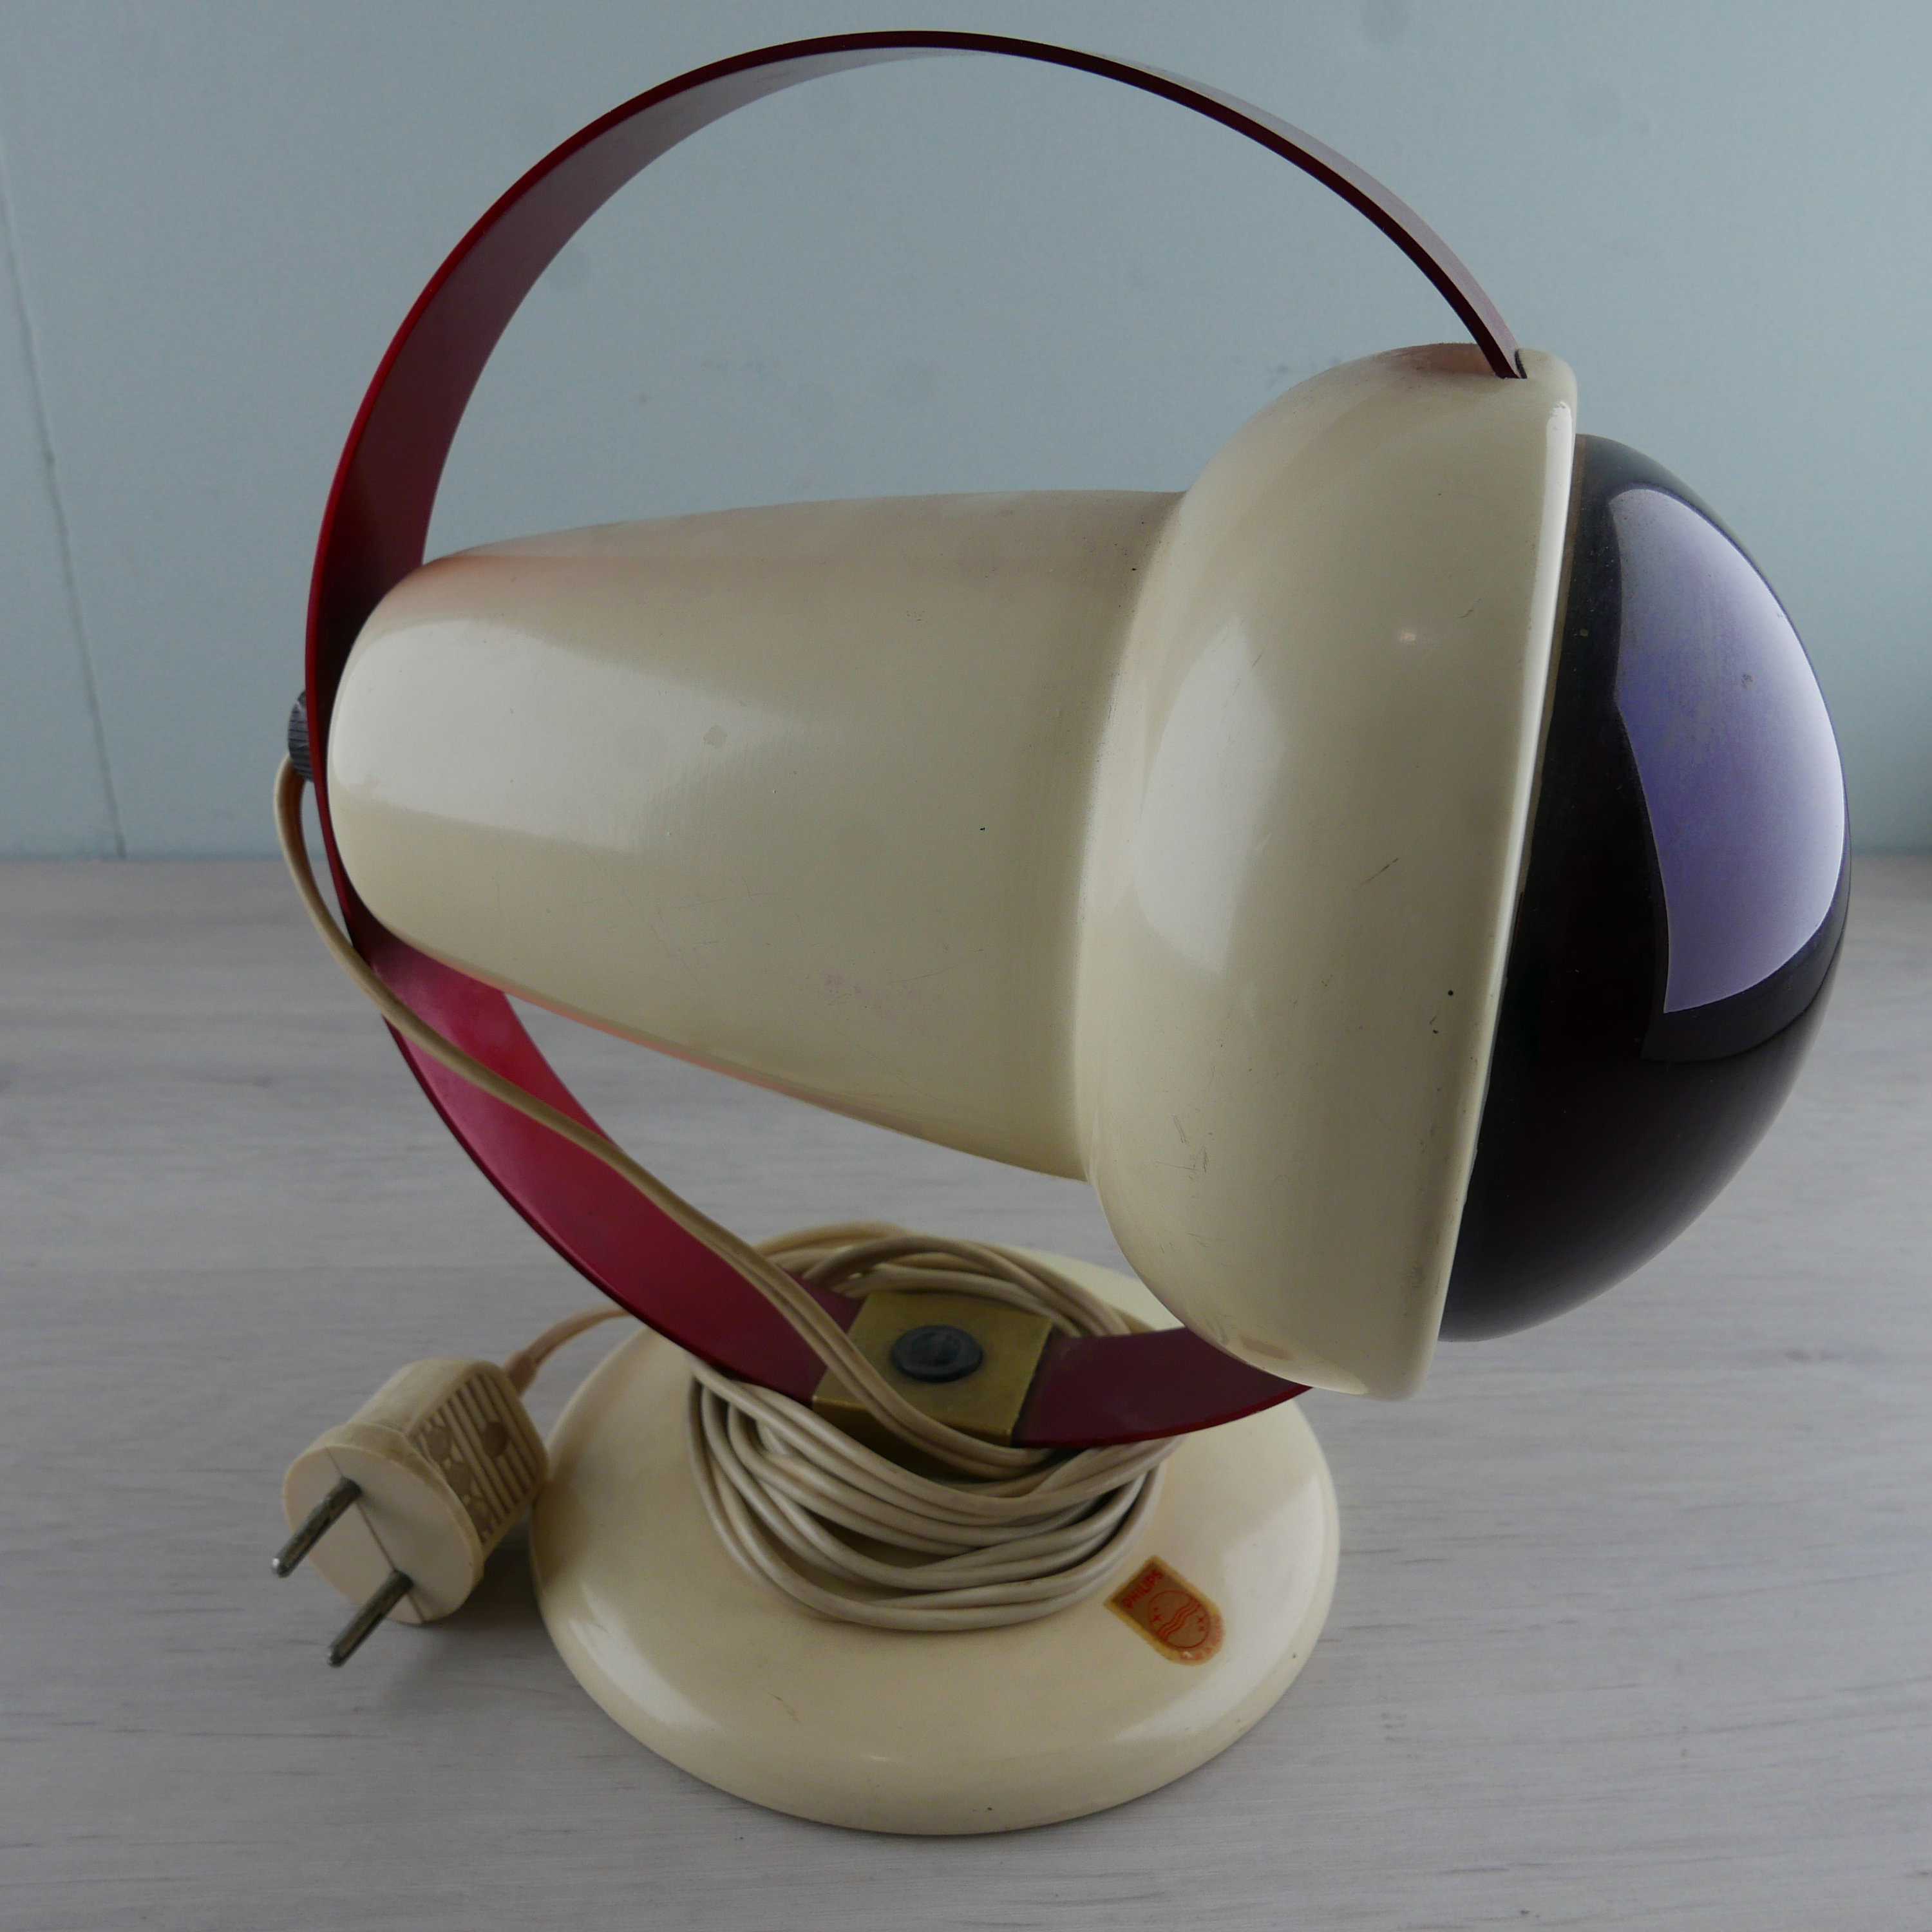 Philips Infrared Lamp Vintage Heat Lamp Netherlands 1960s - Etsy